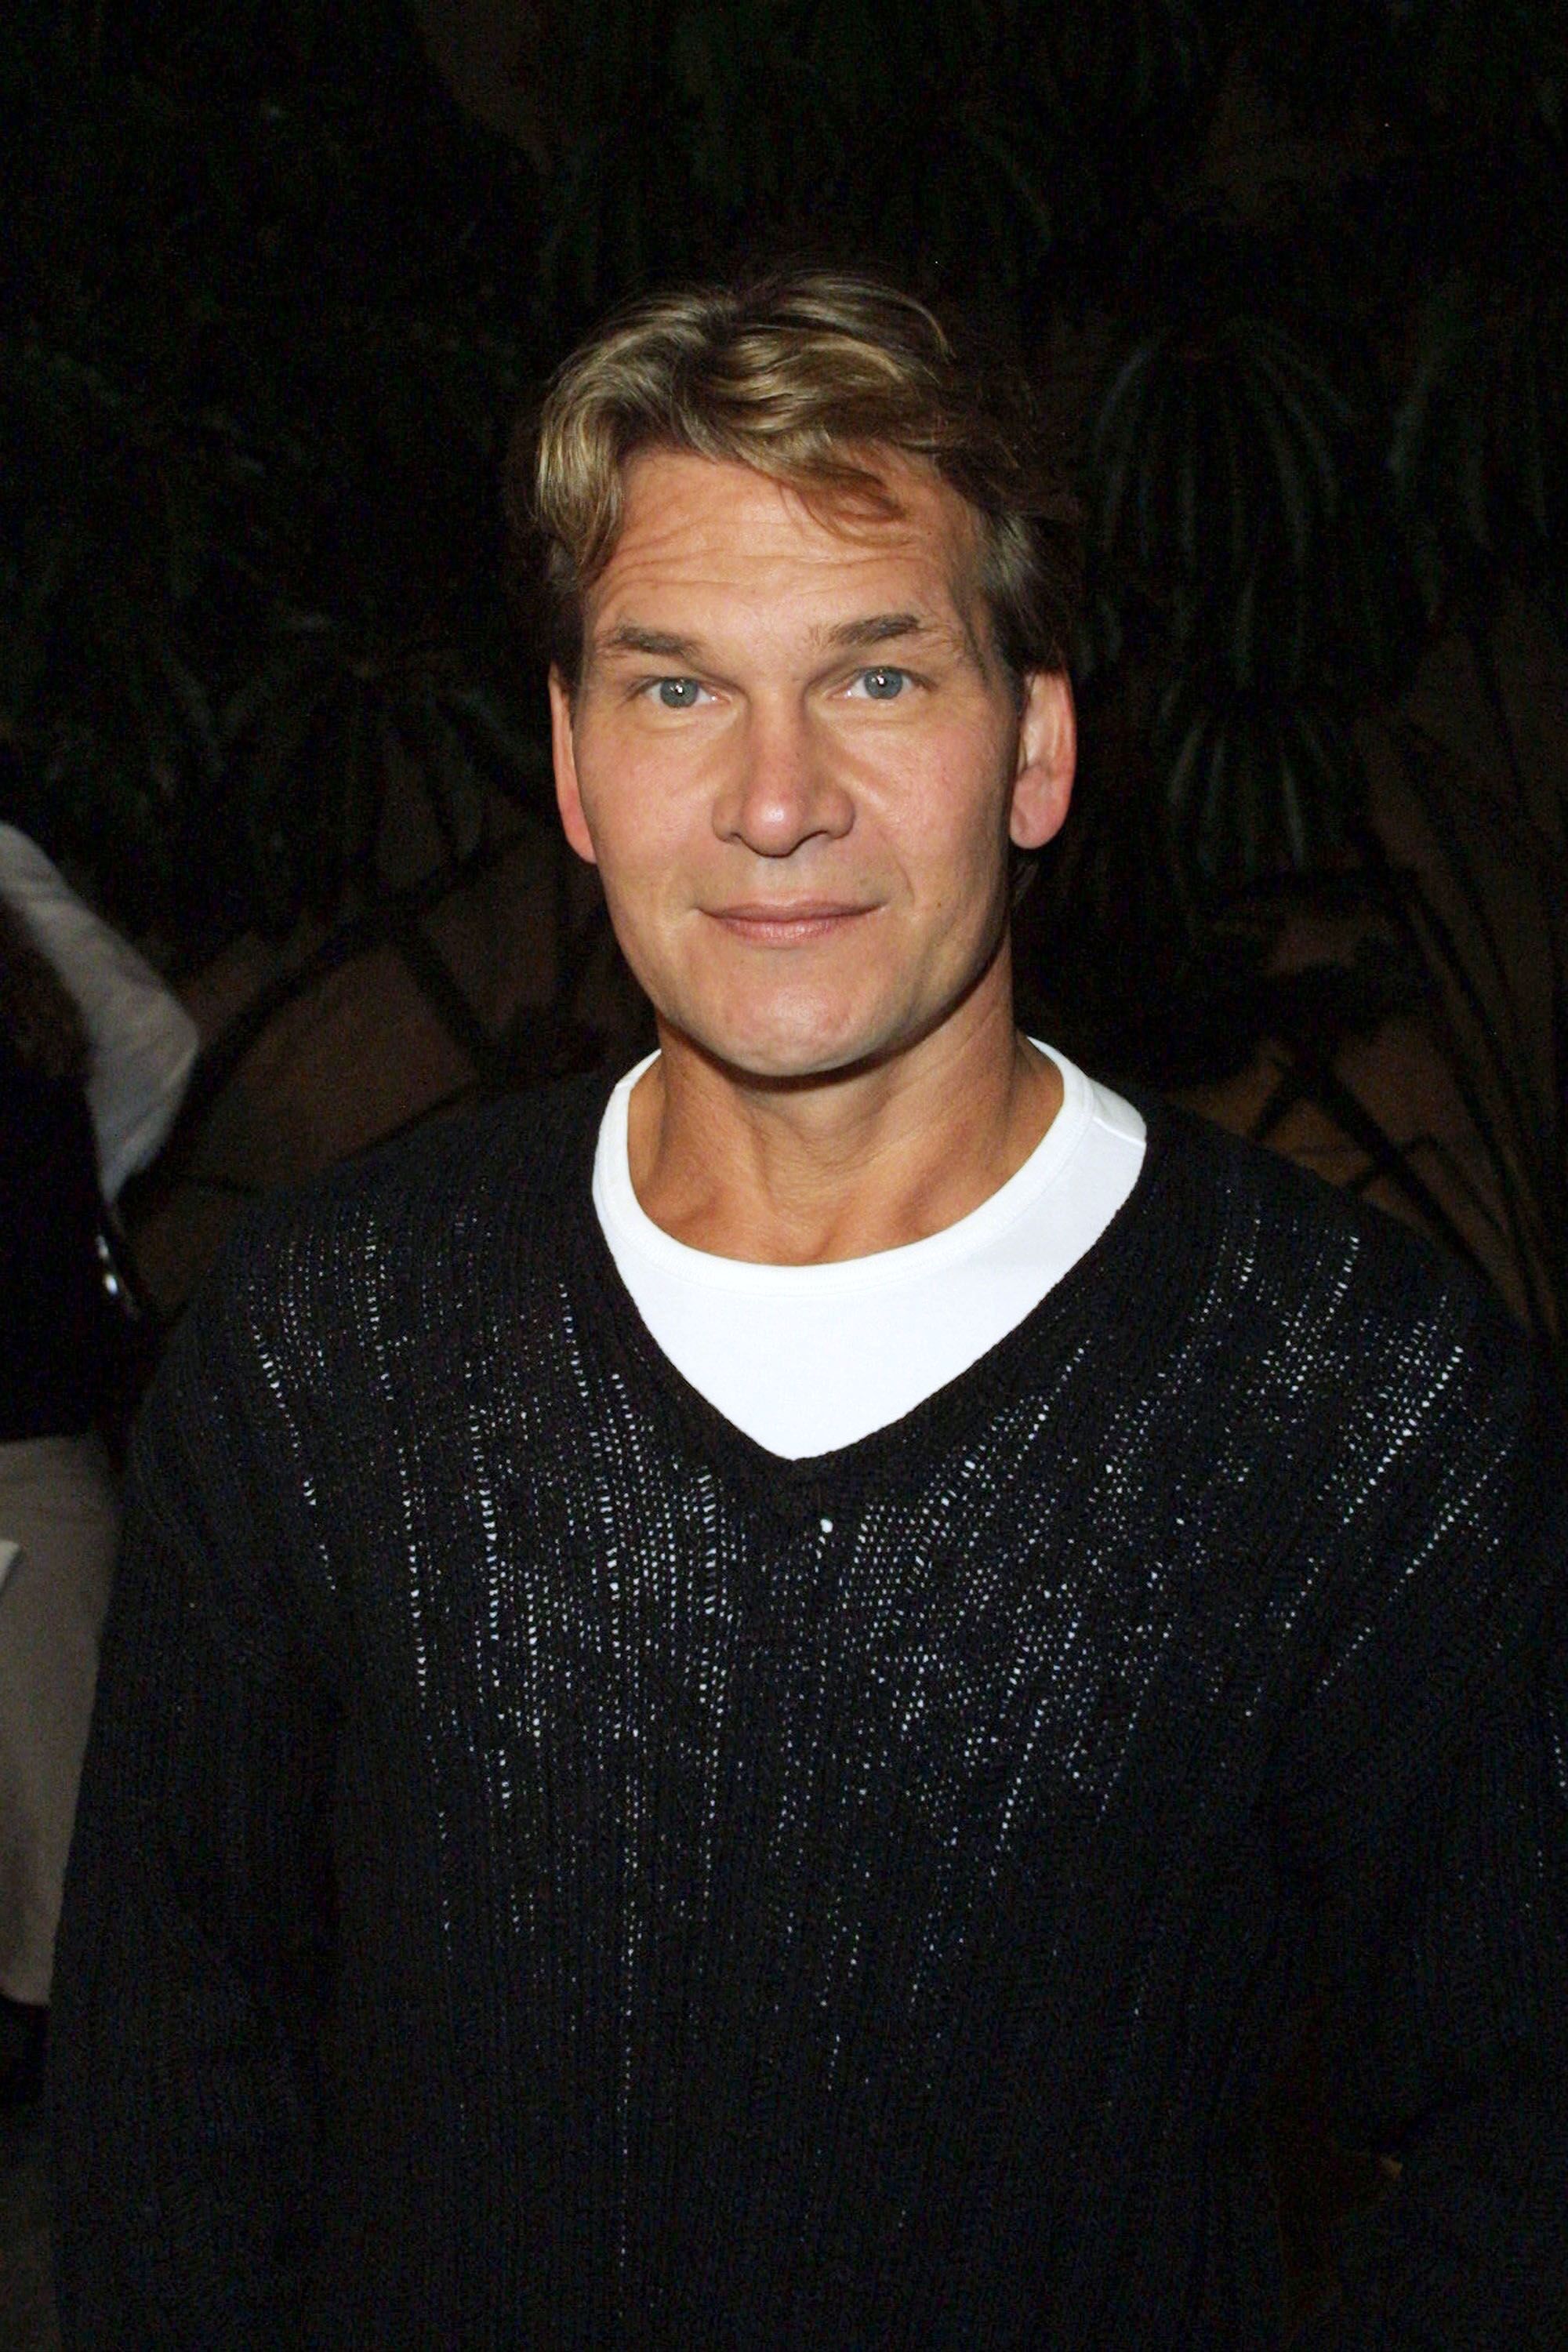  Patrick Swayze arrives at the premiere of "Donnie Darko"  | Getty Images